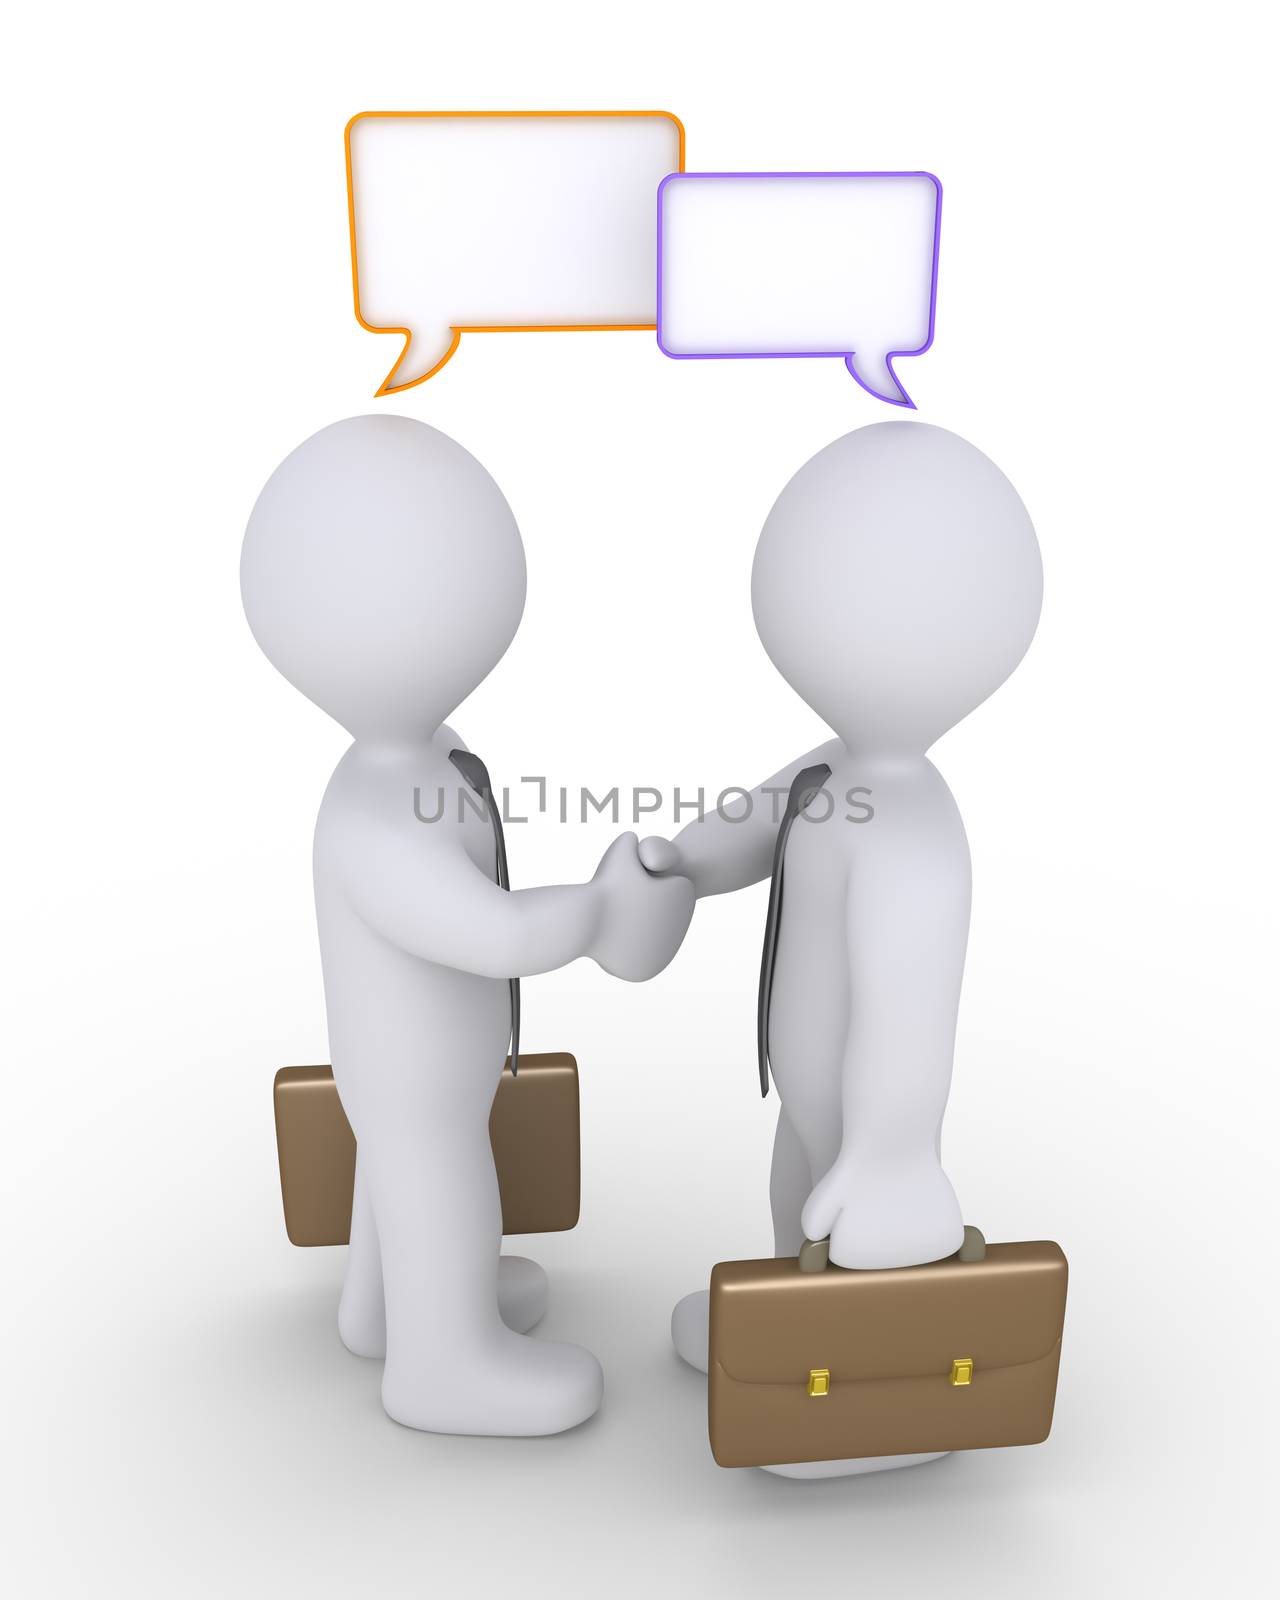 Bussinesmen agreement and speech bubbles by 6kor3dos